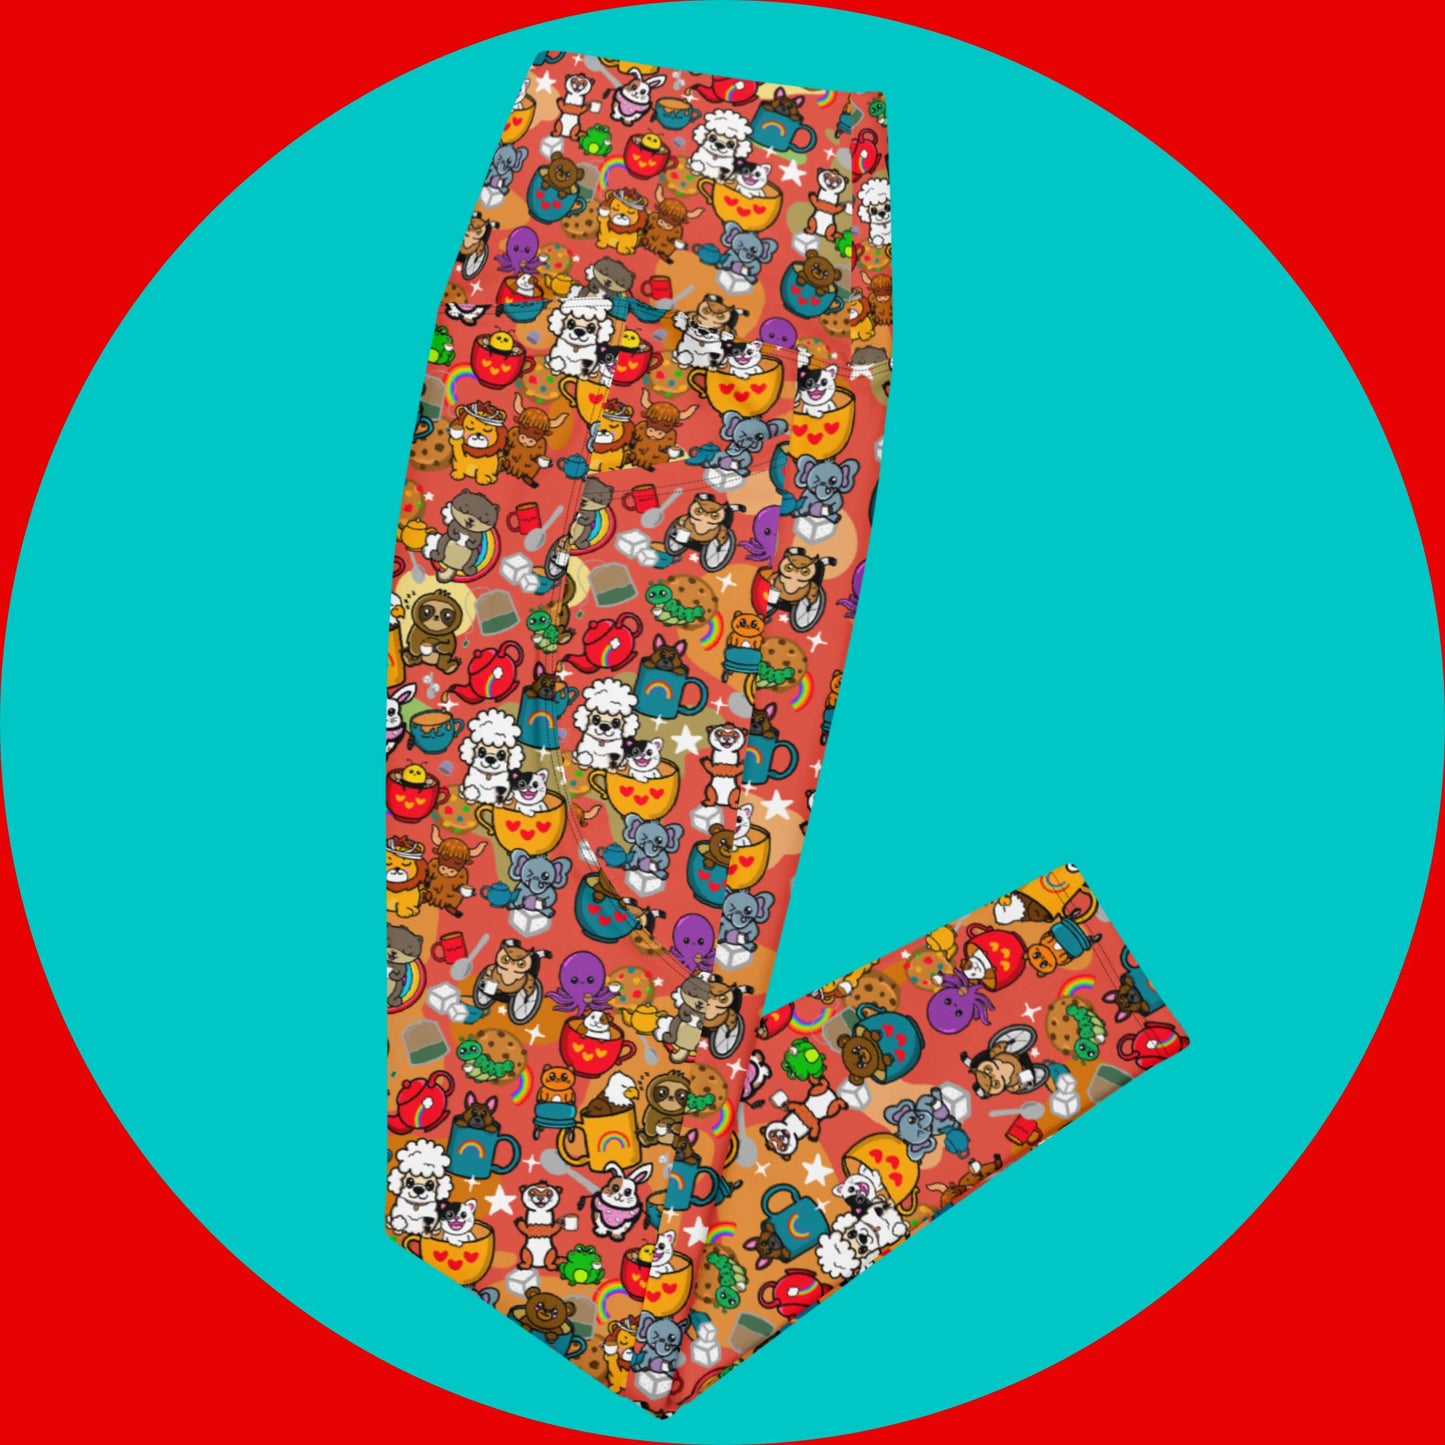 The Disabili Tea and Biscuits - Disability Leggings with Pockets folded in half on a red and blue background. The leggings feature various disabled and chronically ill animal characters drinking tea, sitting in tea mugs and holding up mugs. There is also various cookie biscuits, tea bags, sugar cubes, teapots, rainbows, sparkles and tea spills all underneath. The leggings are a punny gift raising awareness for disabilities.